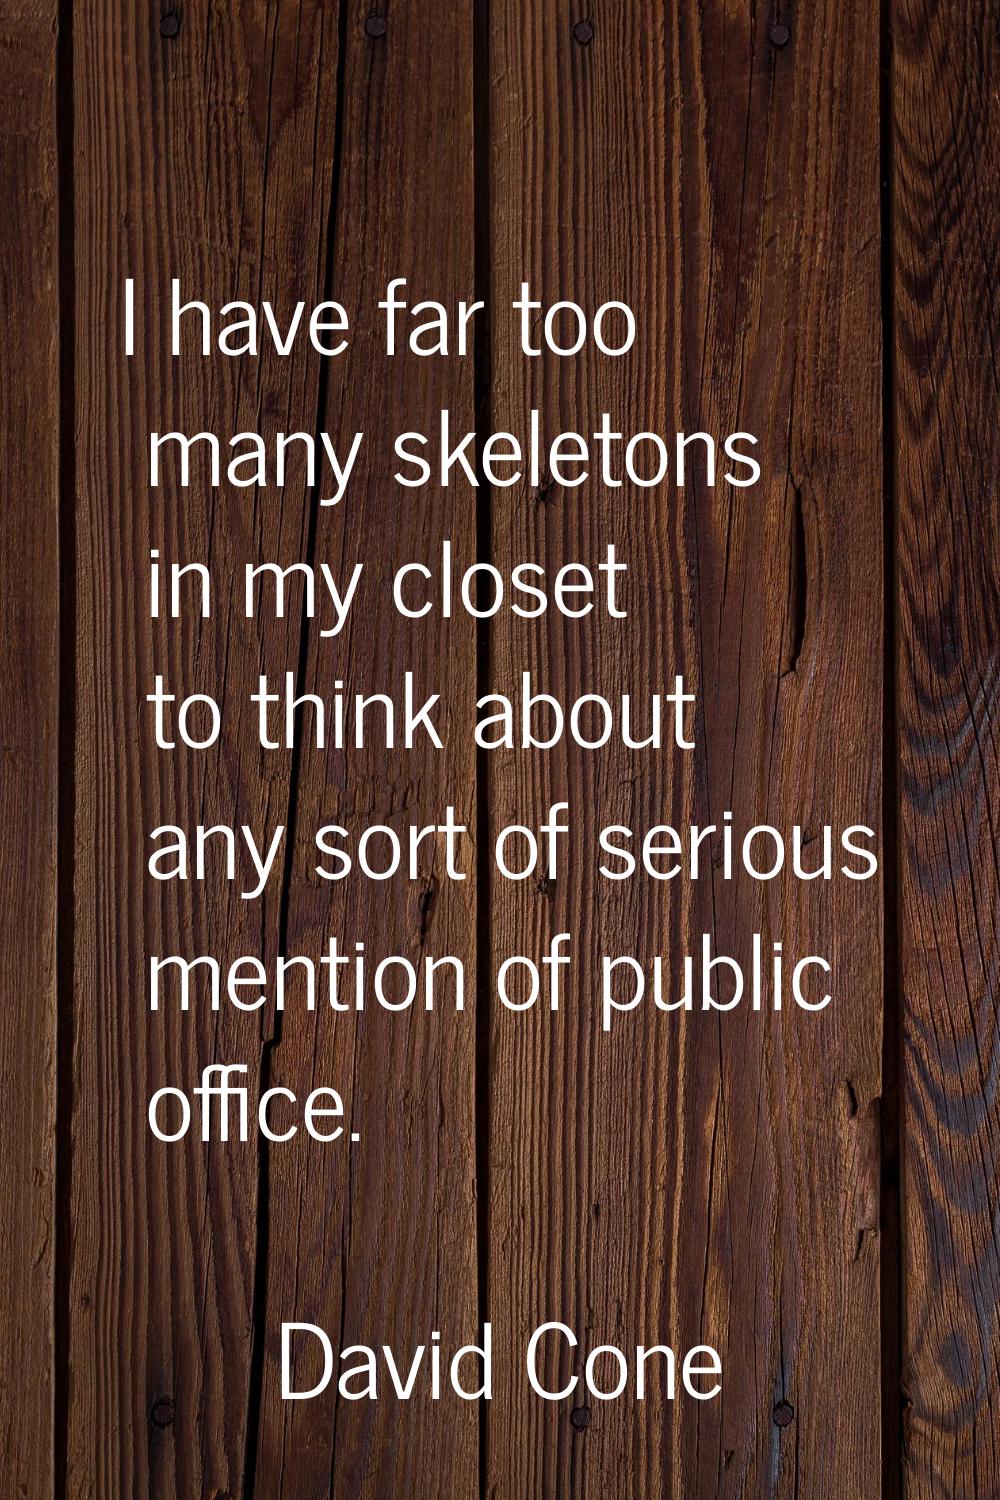 I have far too many skeletons in my closet to think about any sort of serious mention of public off